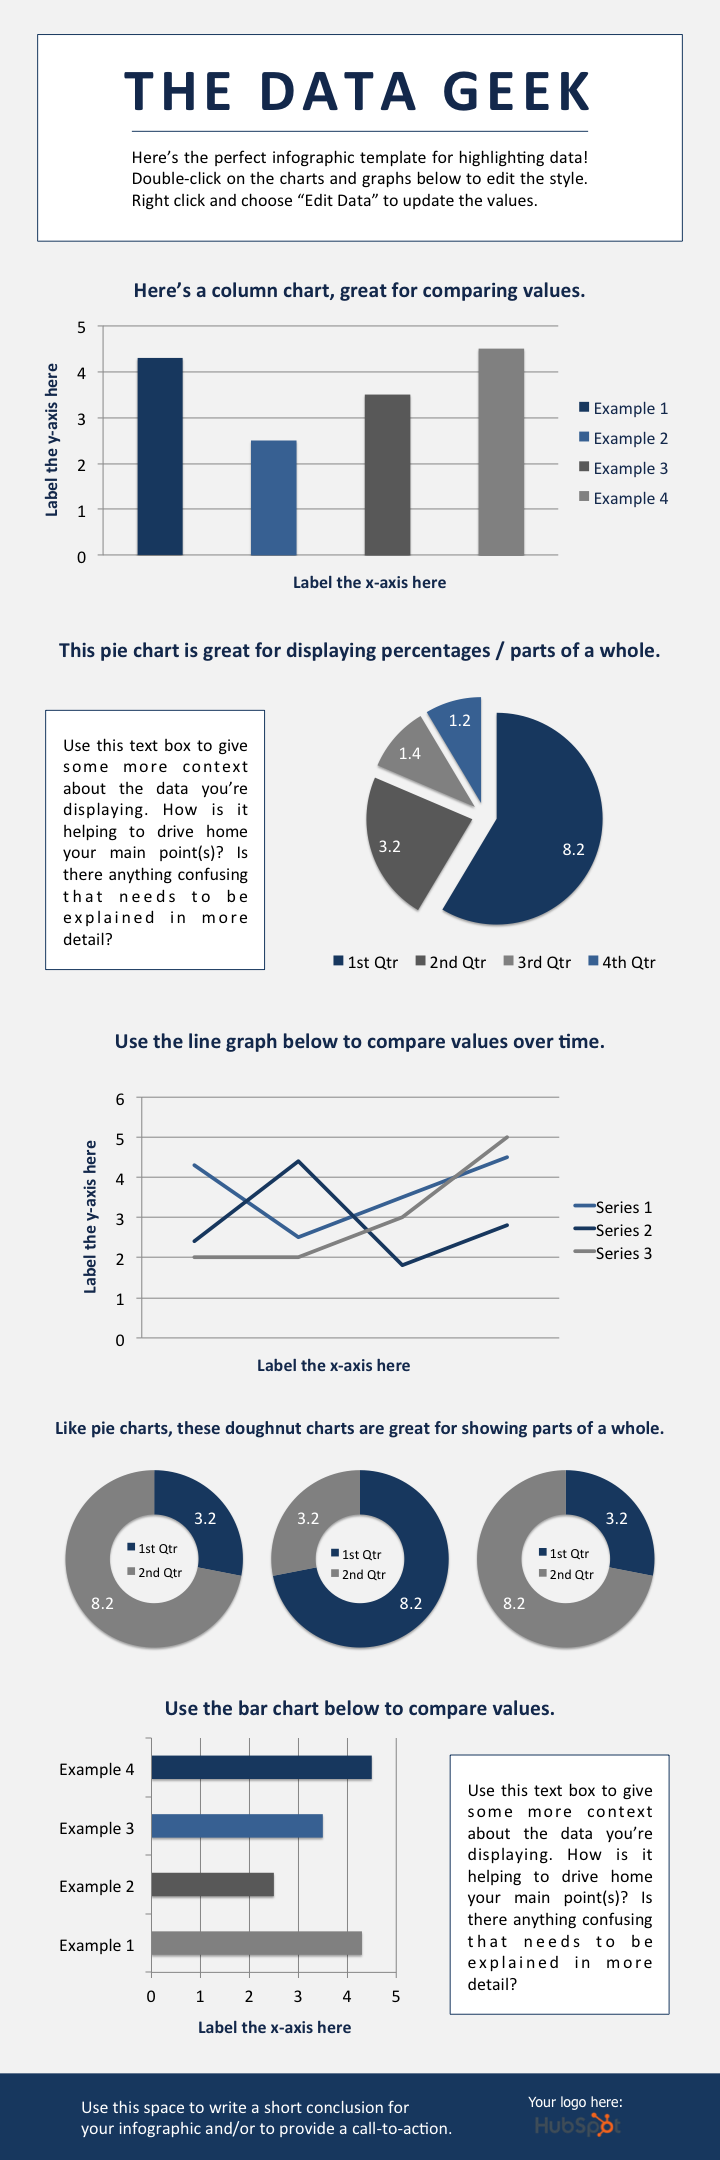 The Data Geek infographic template